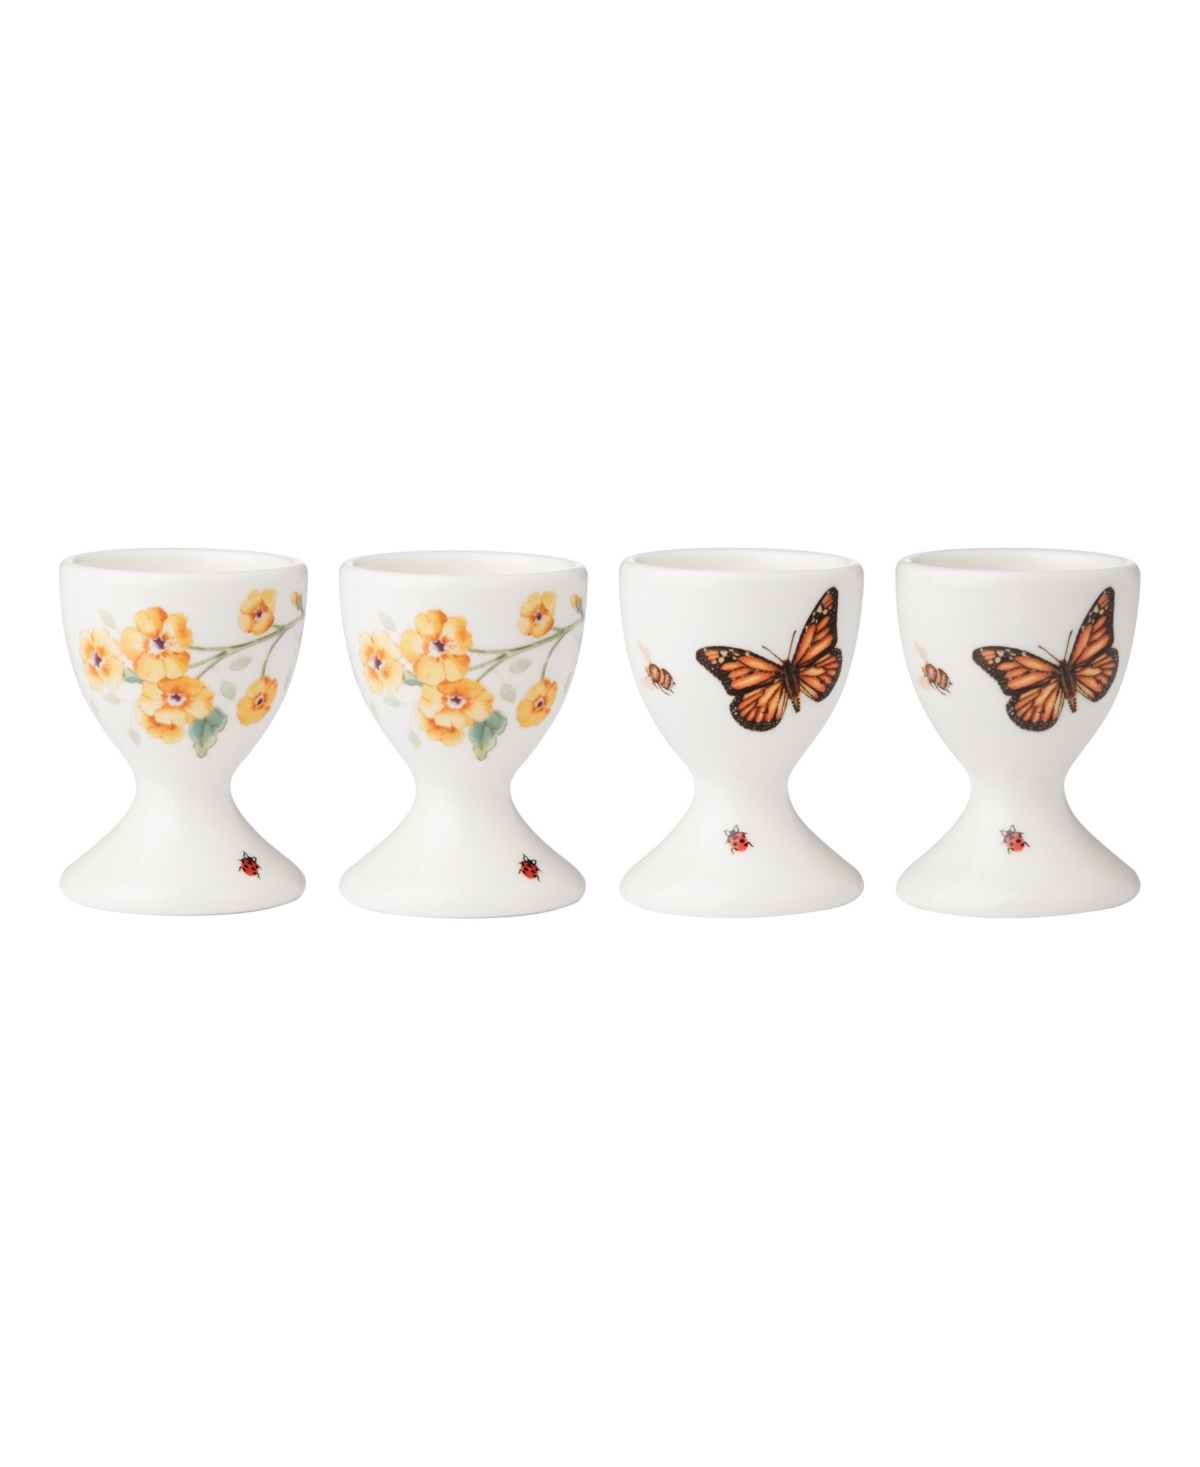 Lenox Butterfly Meadow Footed Egg Cups, Set Of 4 In Multi And White